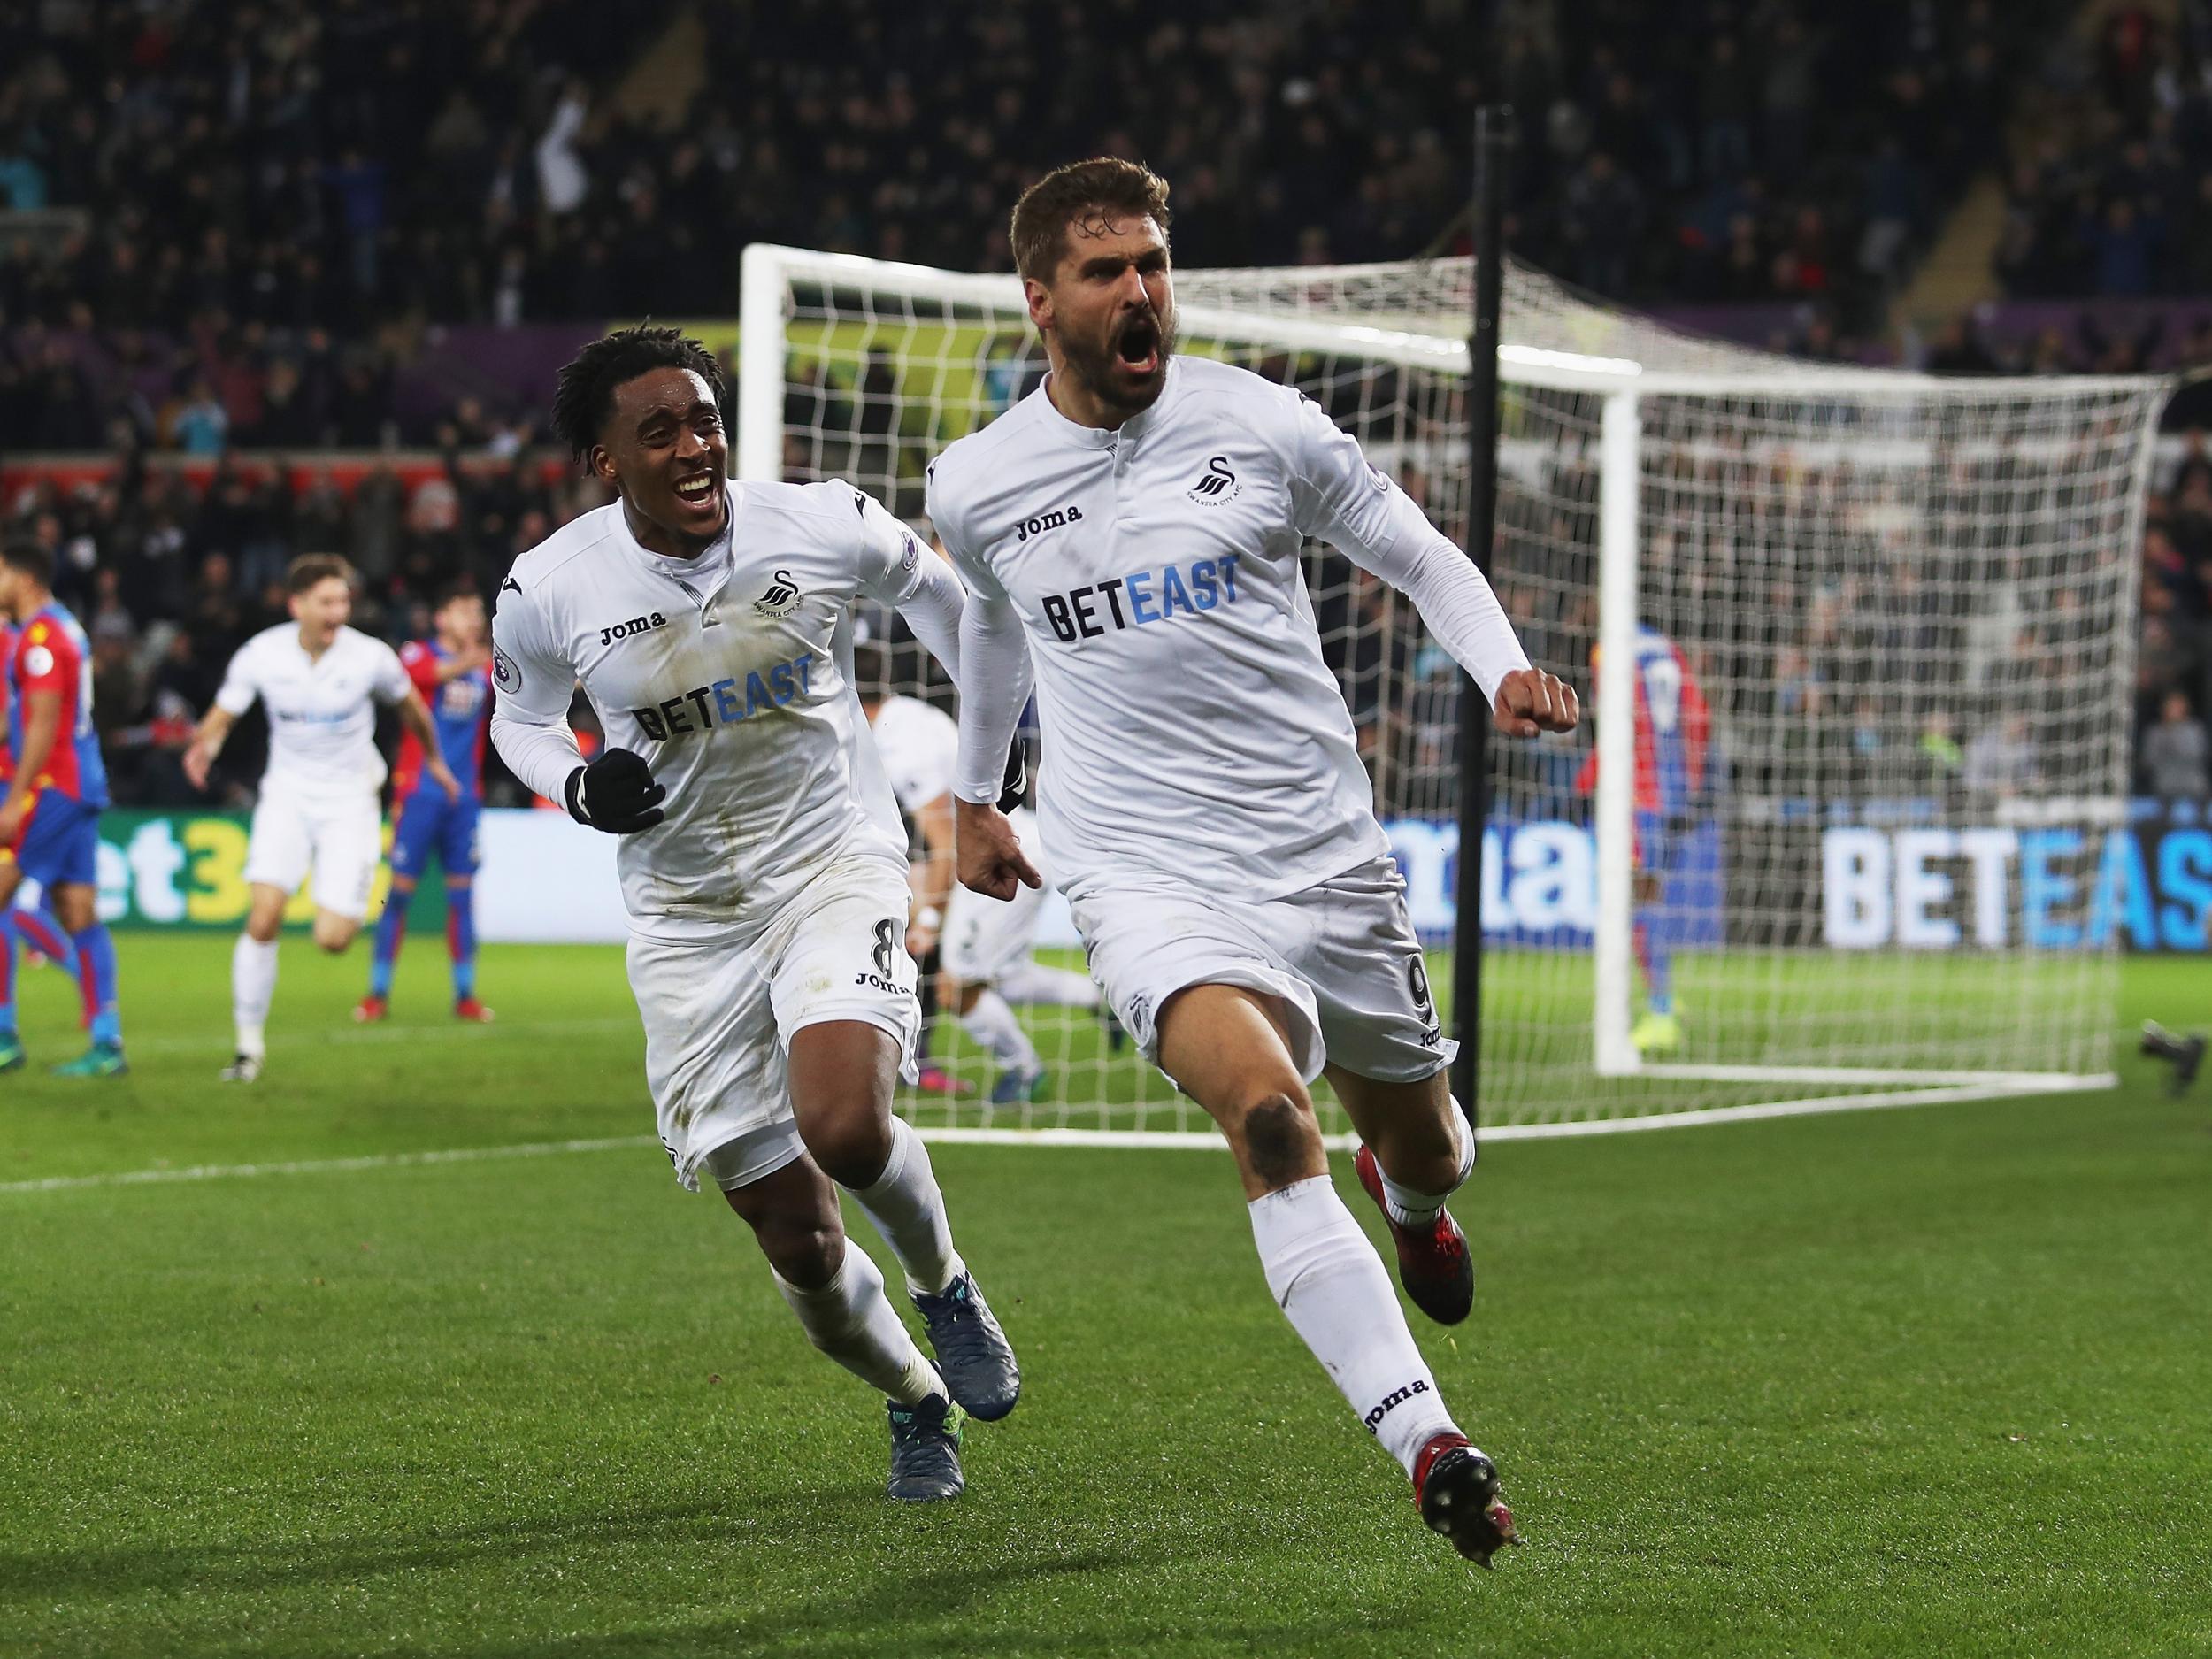 Llorente scored twice in injury time to give Swansea the win